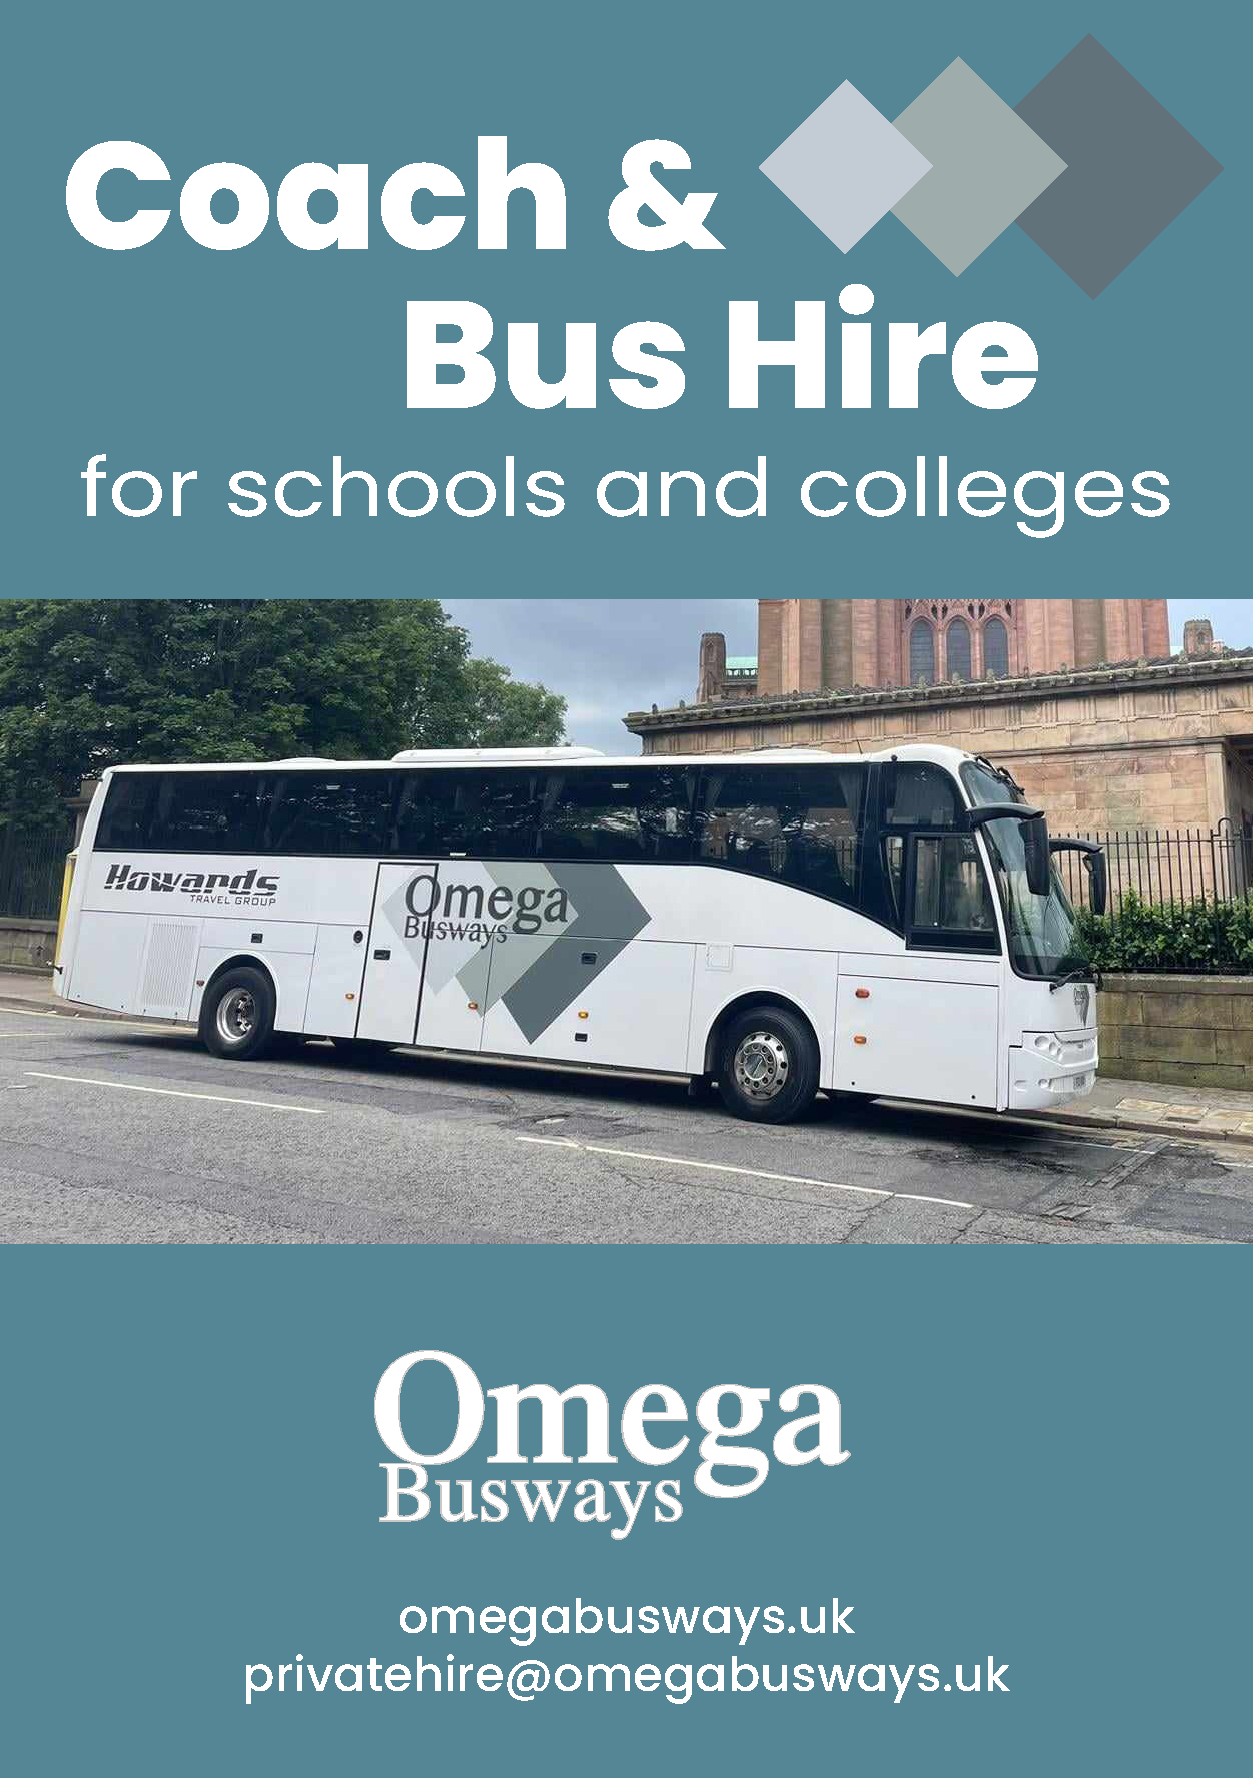 Coach and Bus Hire from Omega Busways